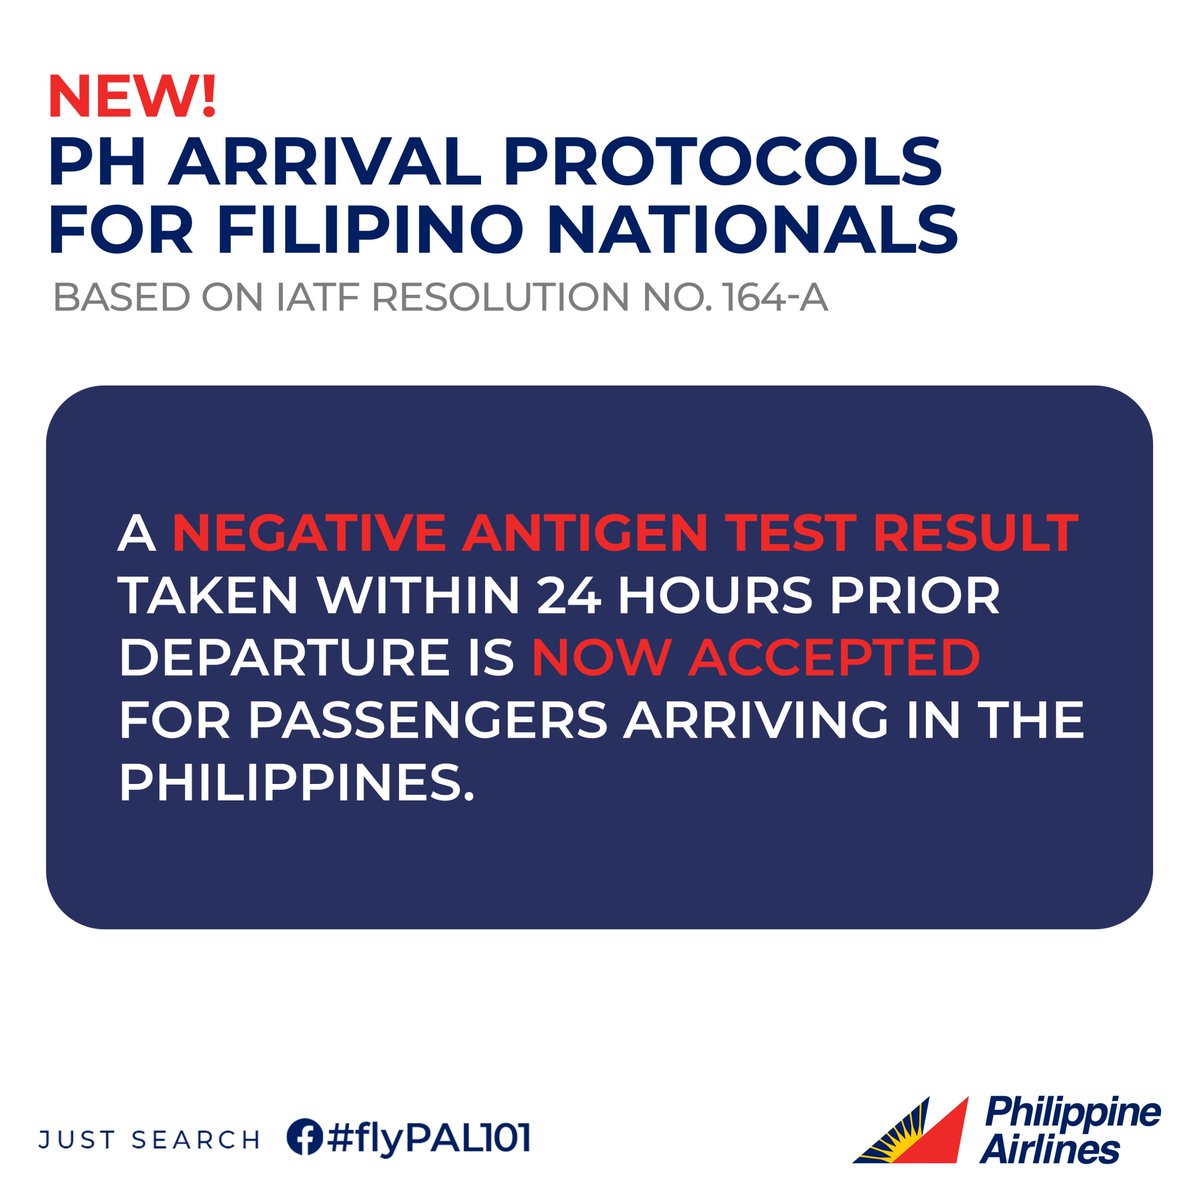 A negative antigen test result is now accepted for passengers arriving in the Philippines. To know more about requirements when traveling to the Philippines, visit bit.ly/PALTravelsToPH.